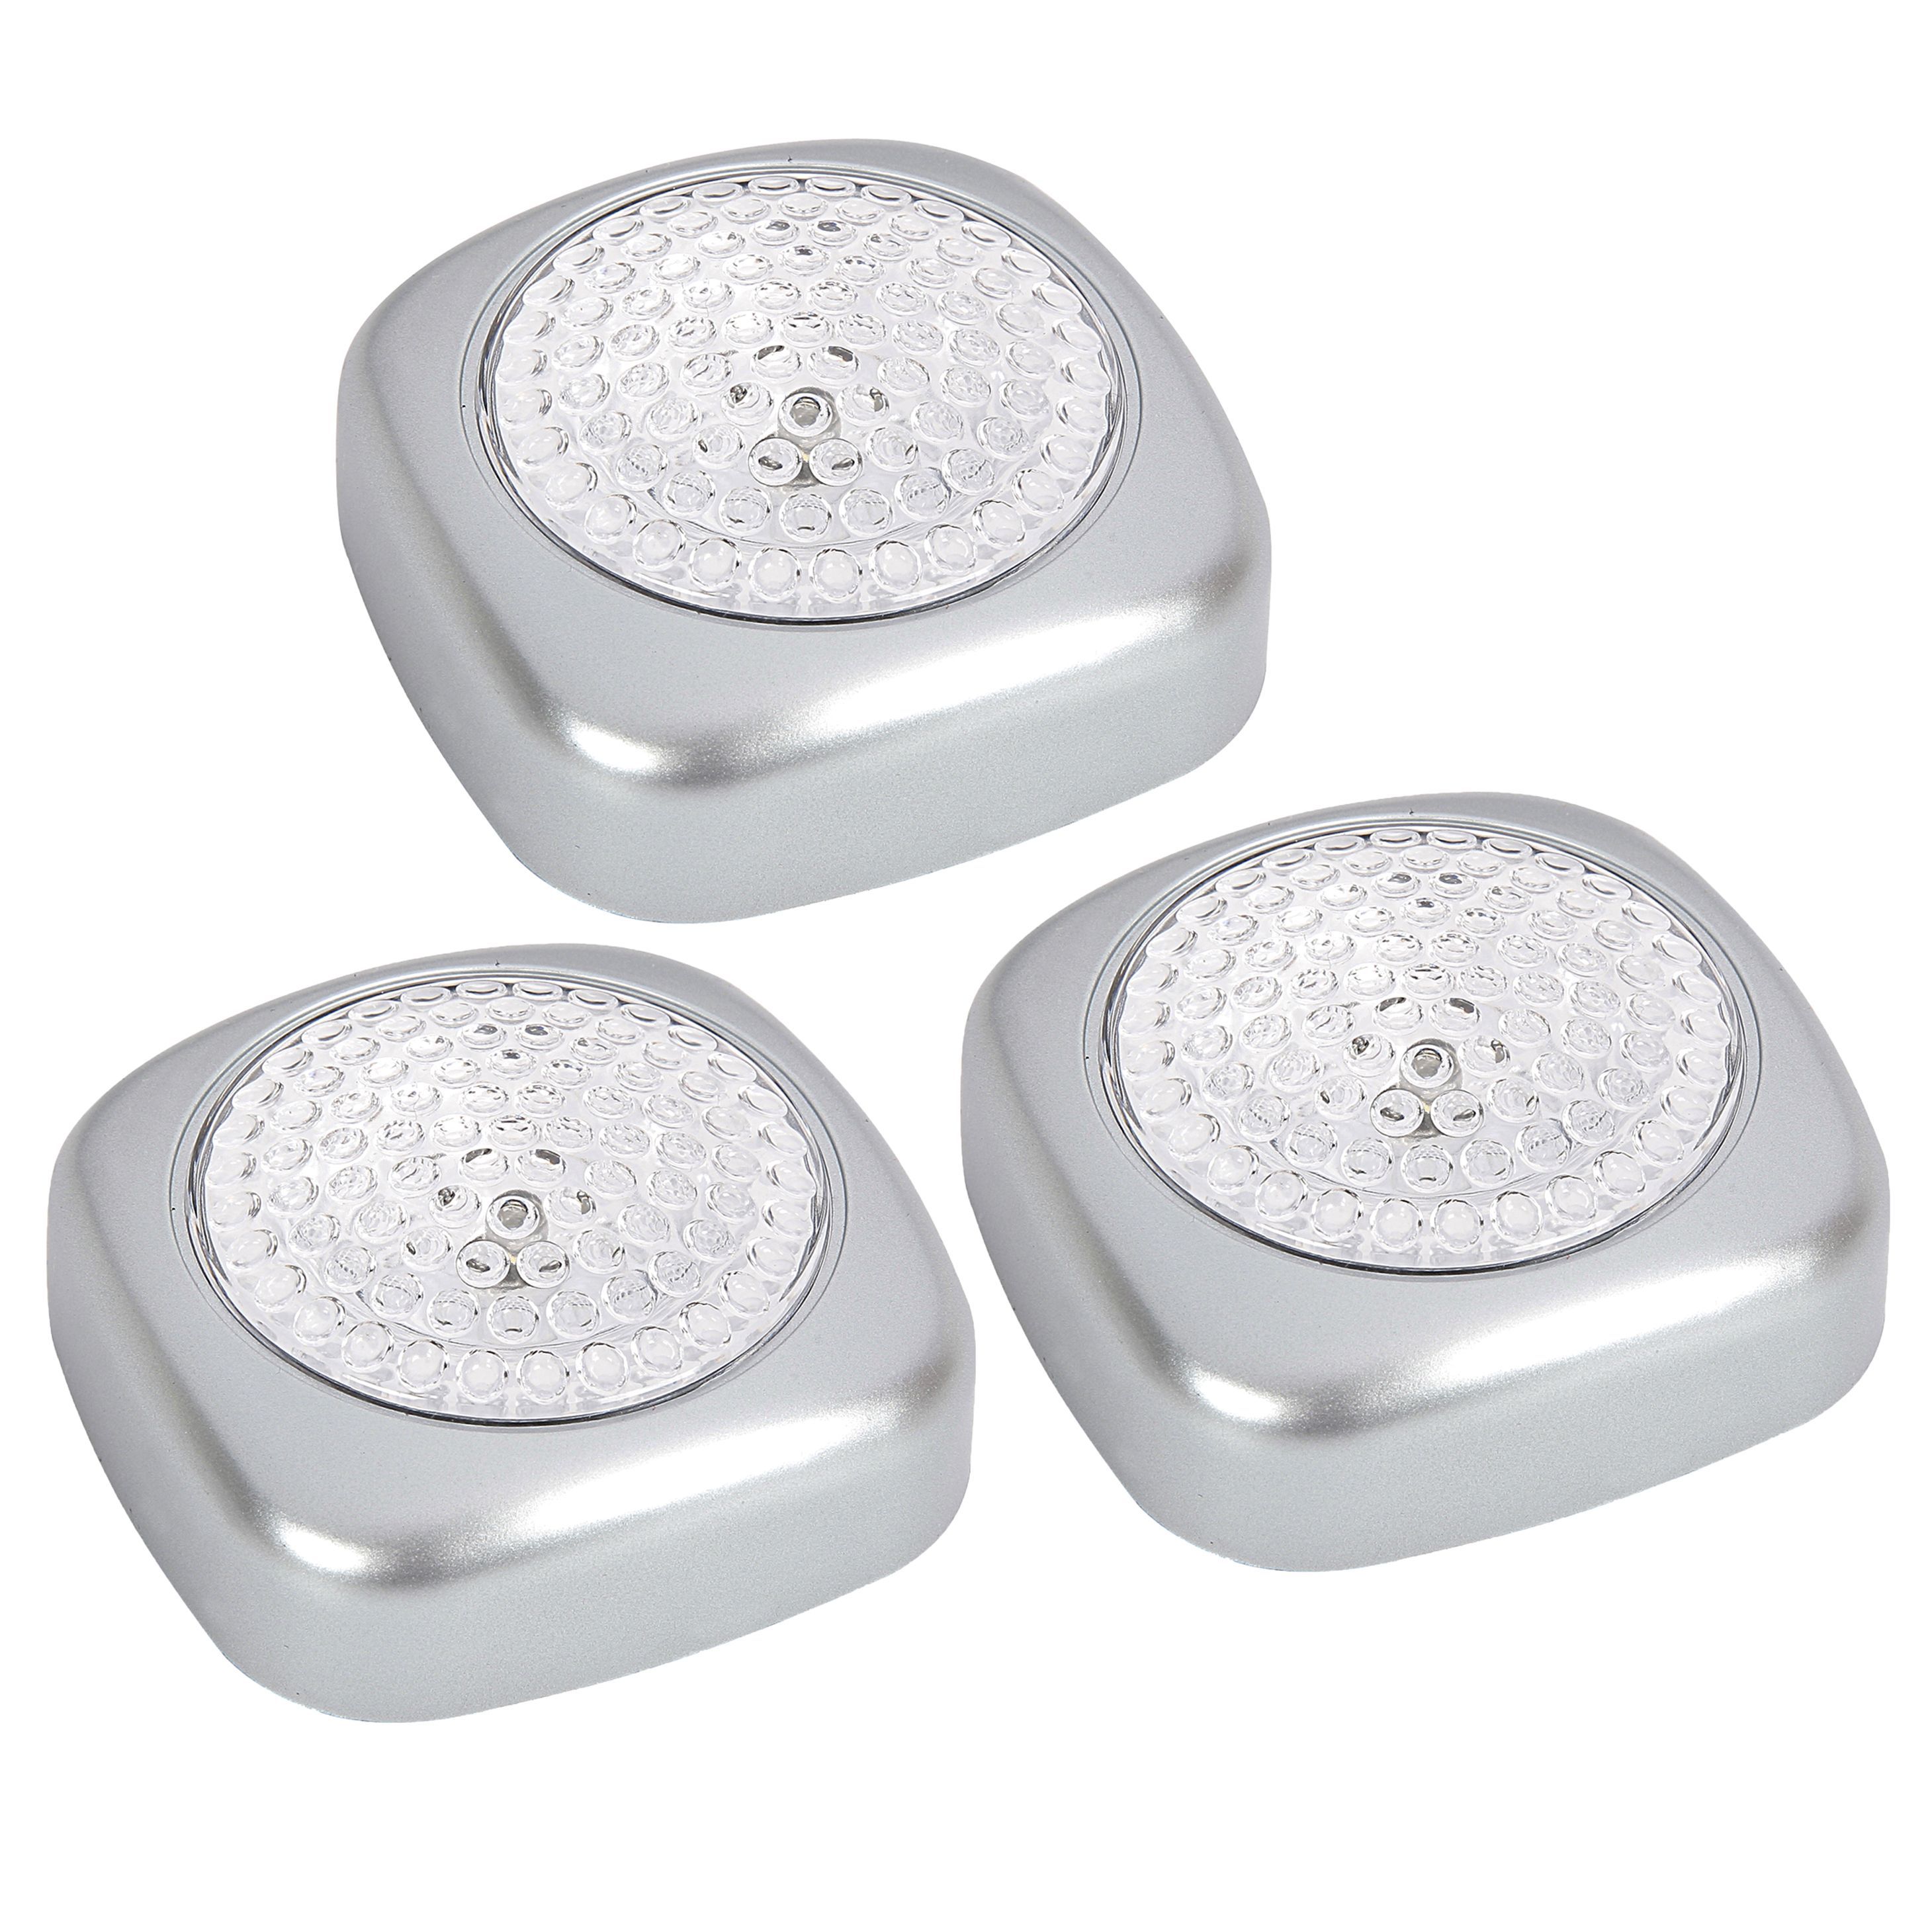 Diall 10lm LED Battery-powered Push light, Pack of 3